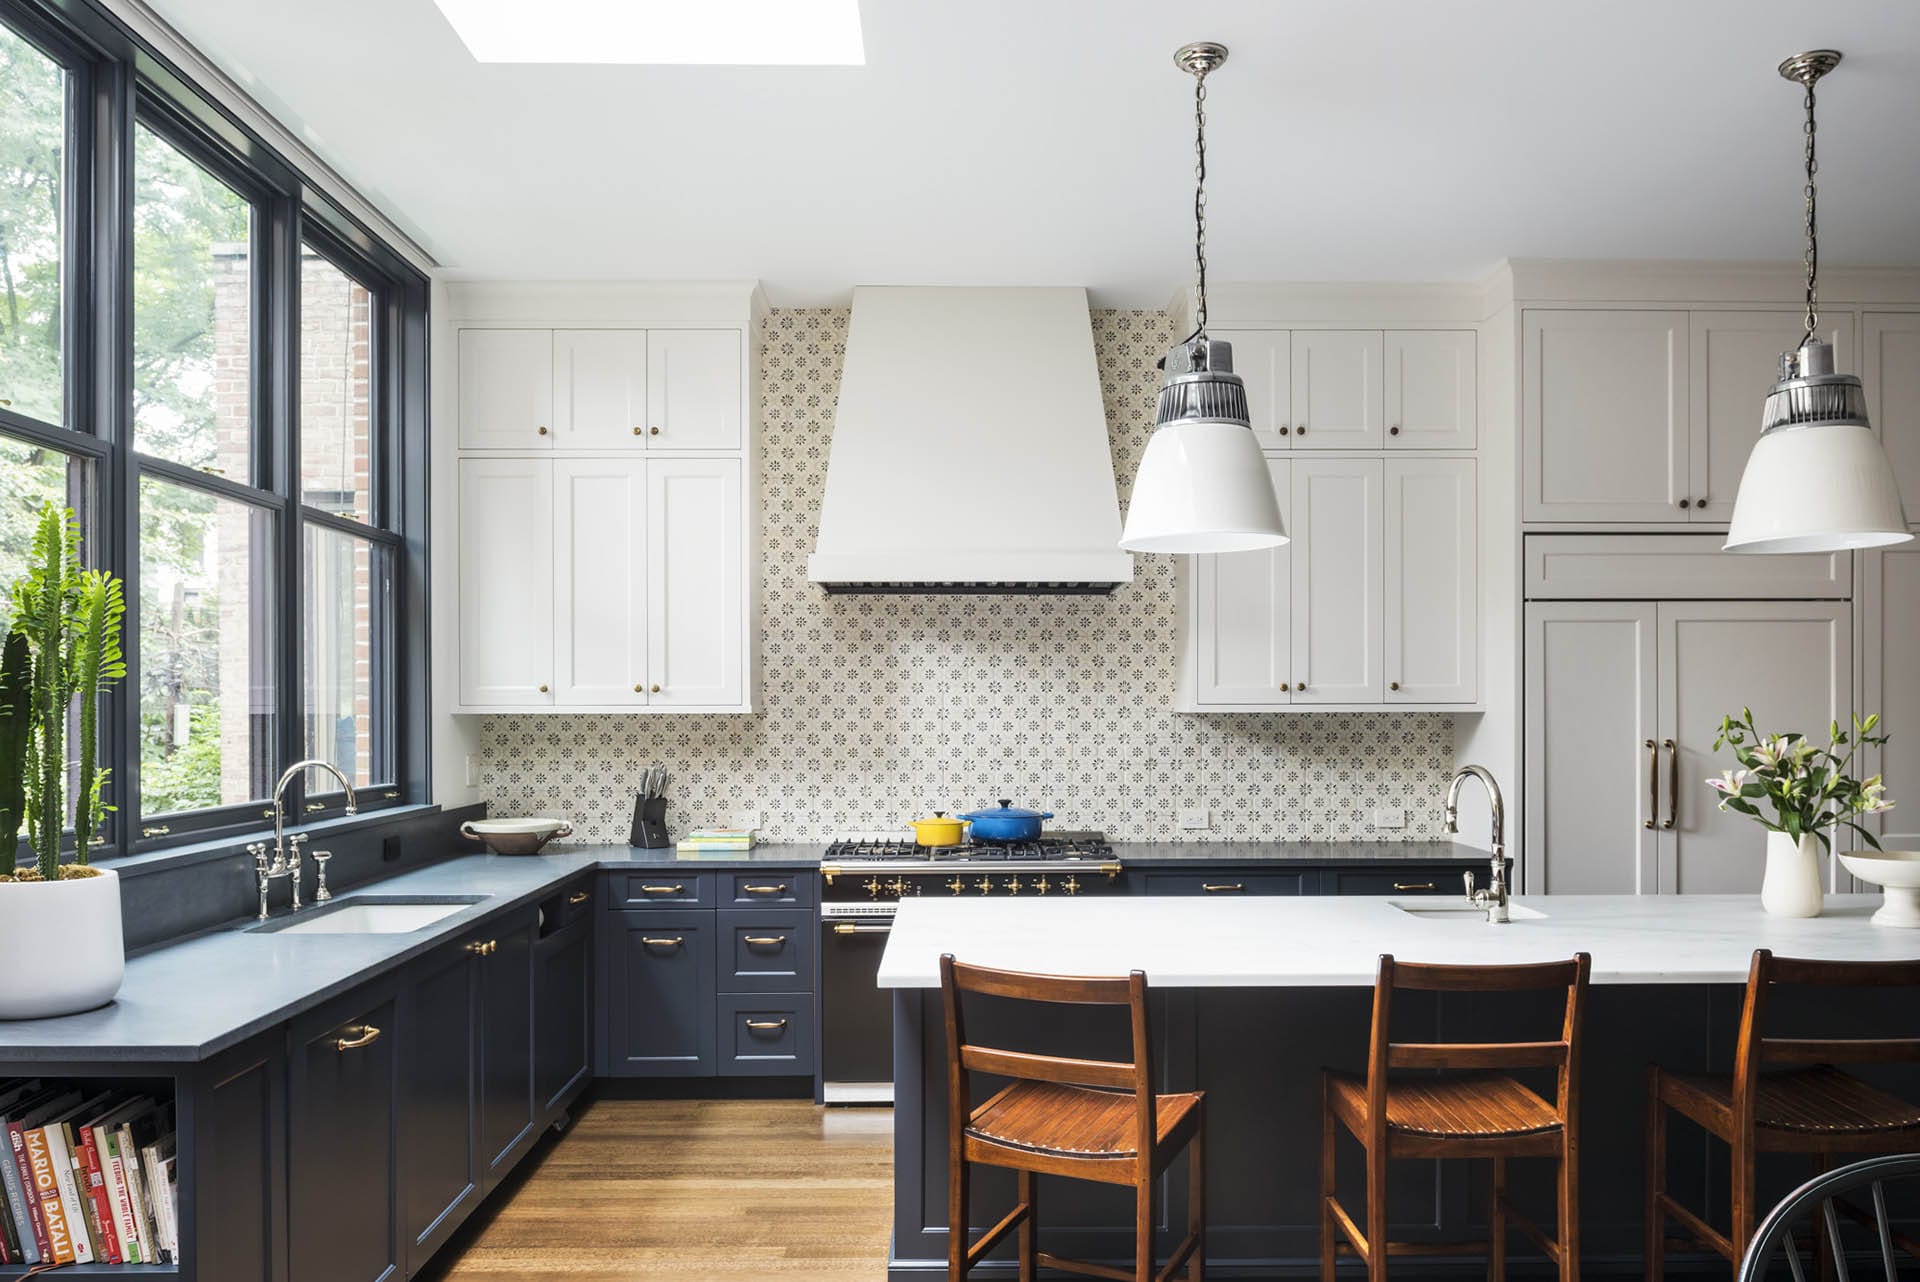 Kitchen with patterned backsplash and blue-painted island and lower cabinets.